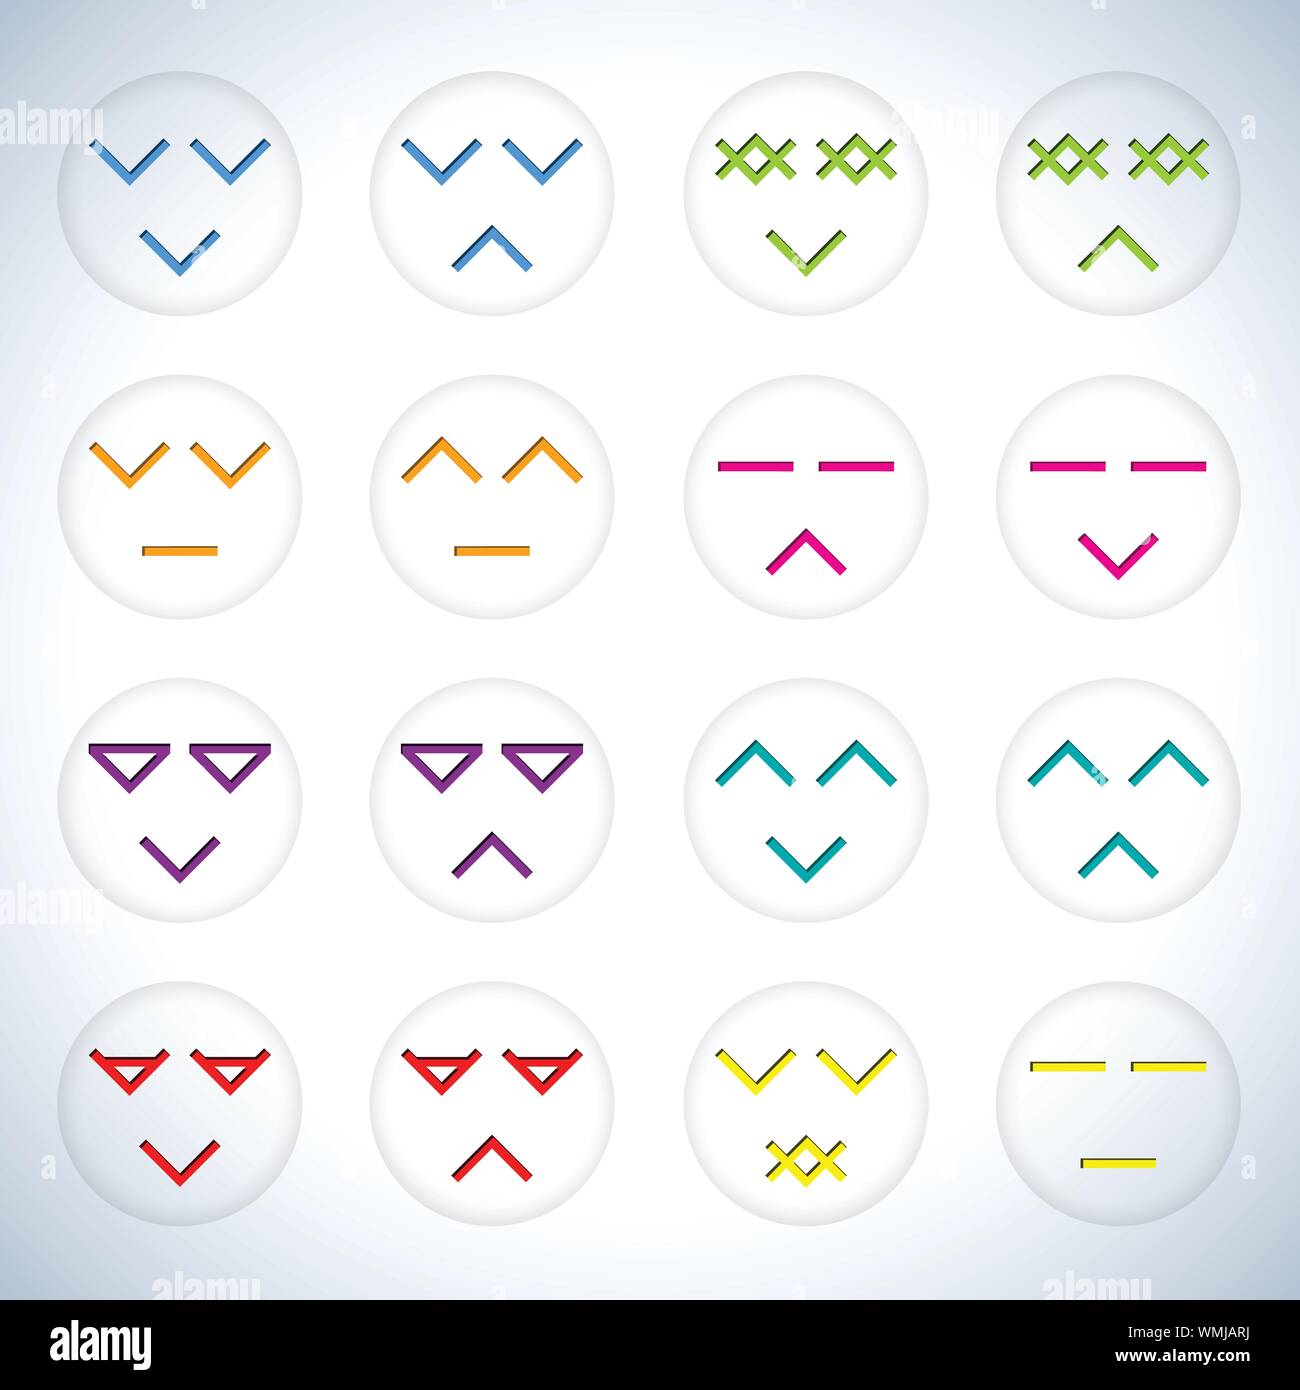 Smiley faces shaped with debossed arrows Stock Vector